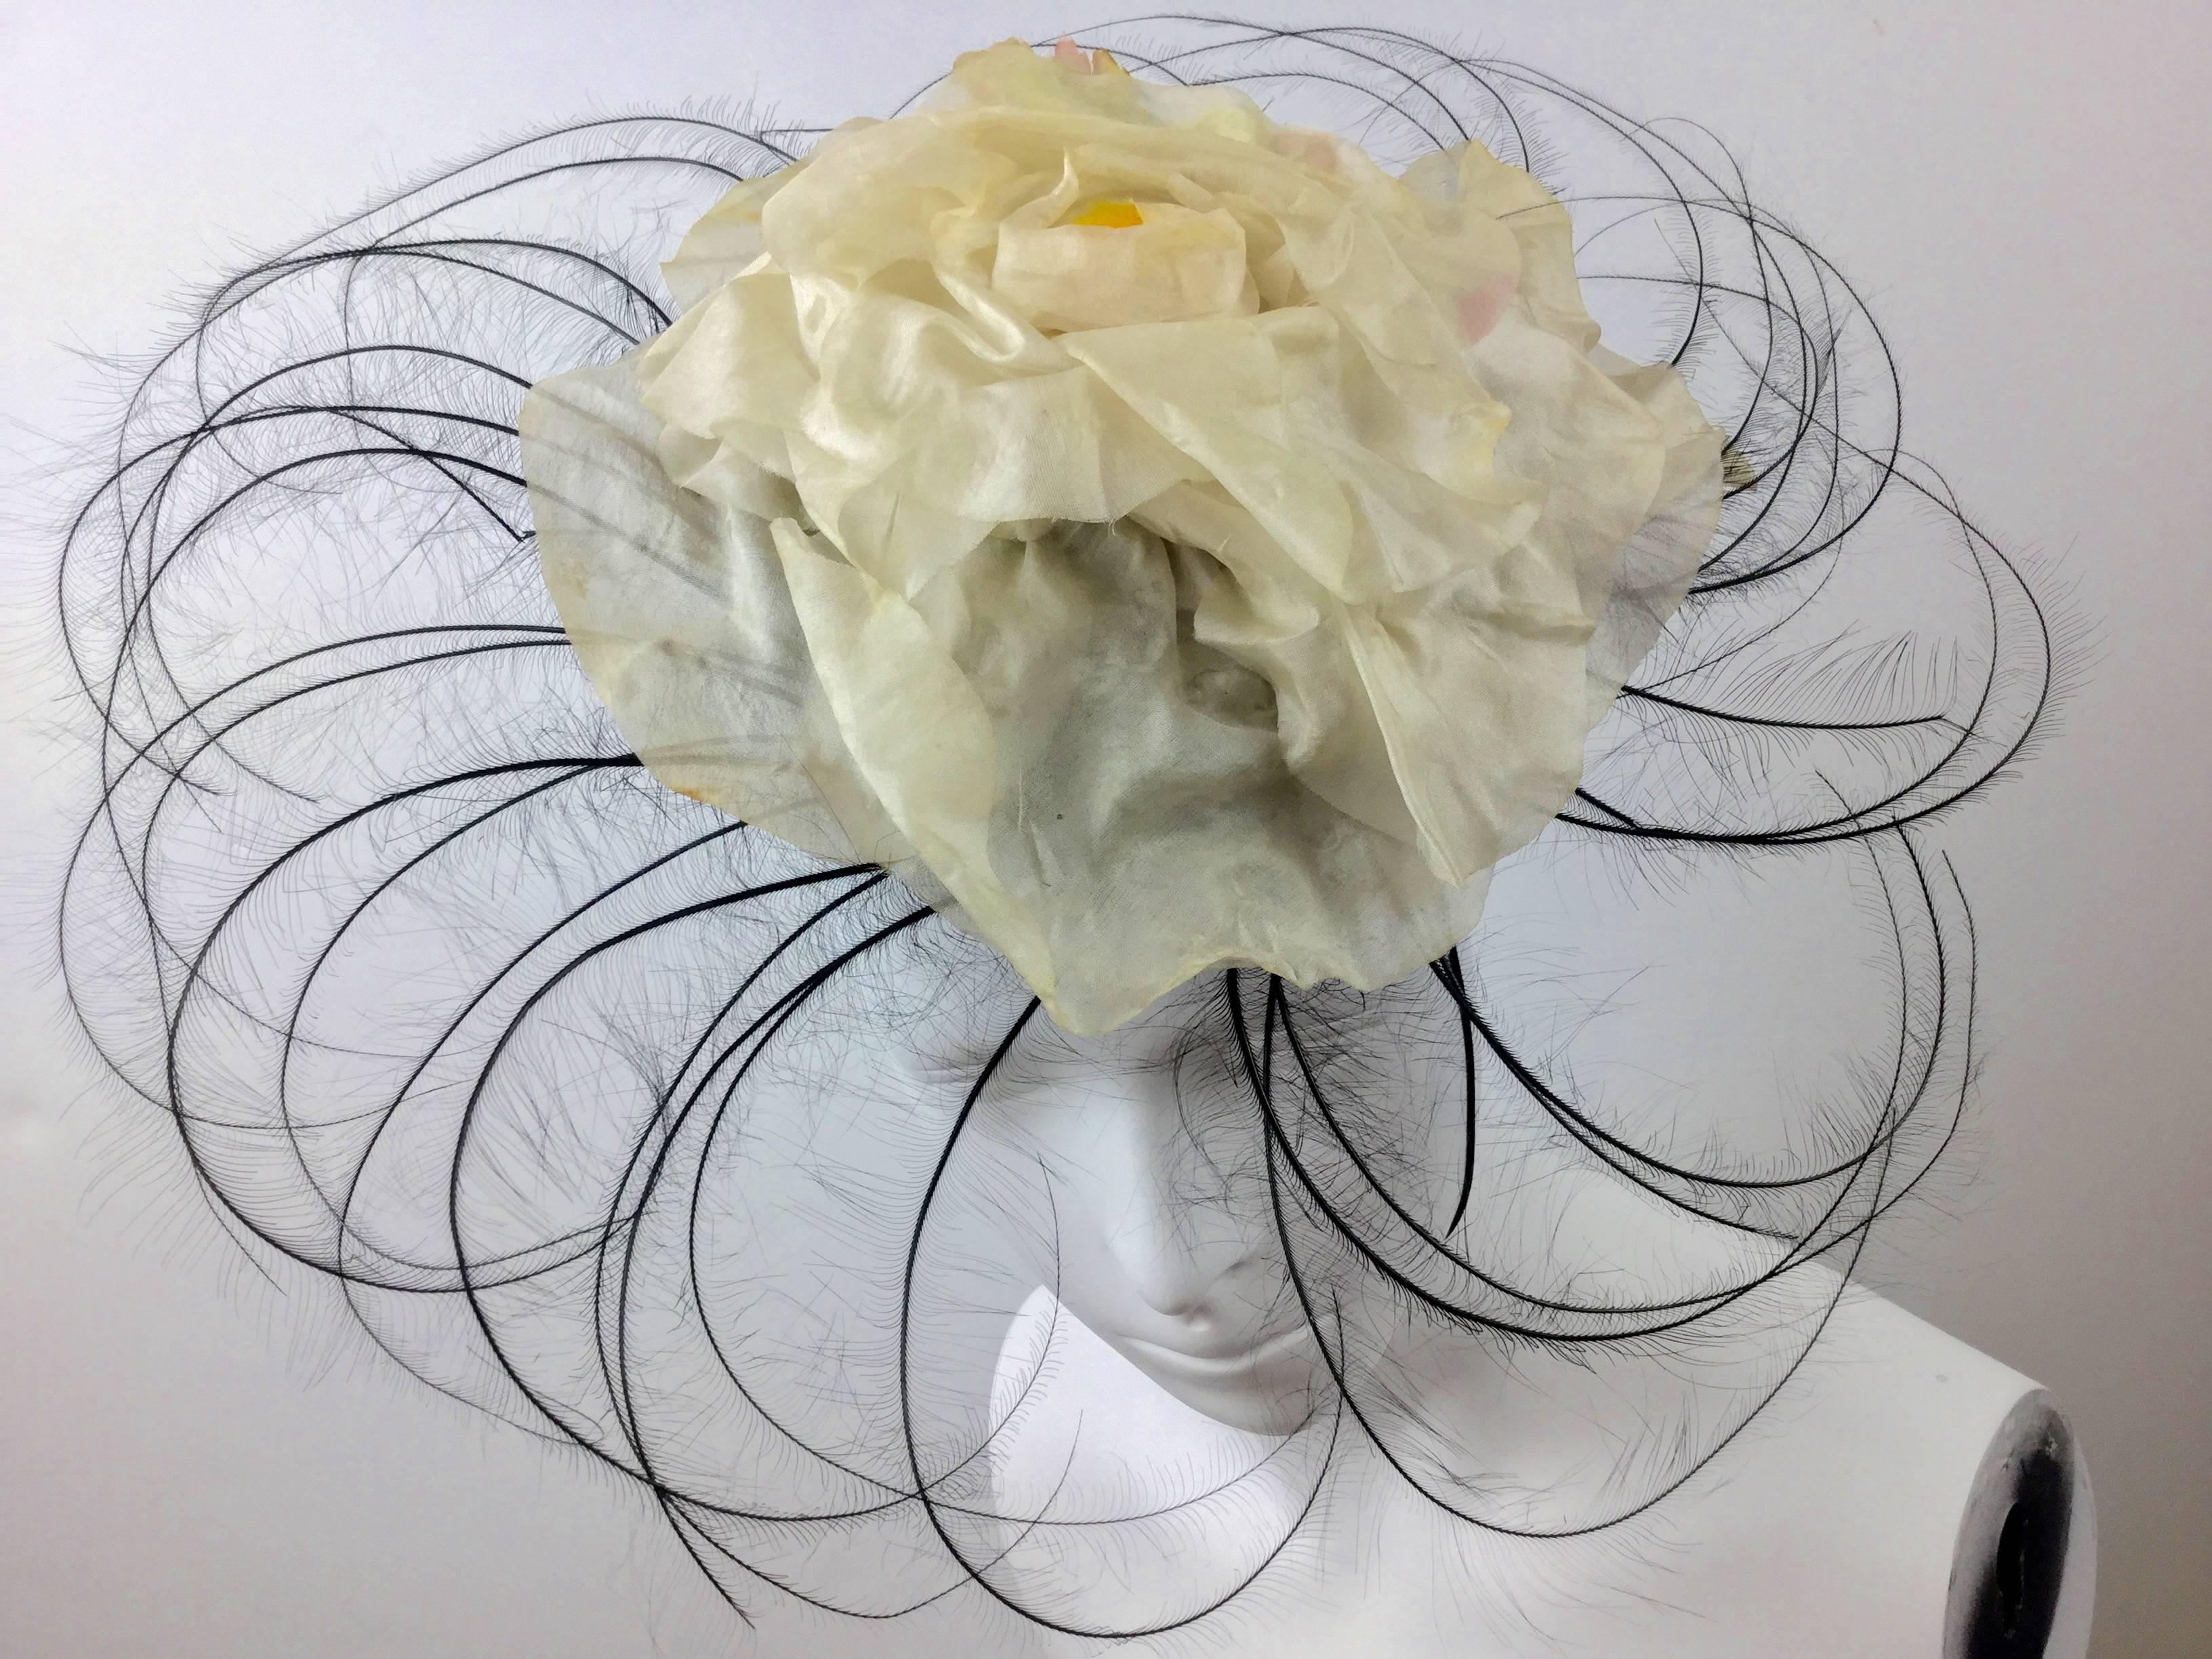 Incredibly rare Bes Ben pinwheel hat. A spiral of shaved black feathers radiate from a central off-white silk camellia with subtle hints of pink and green underneath. There are more feathers at the front and sides than at the back. 

It is designed